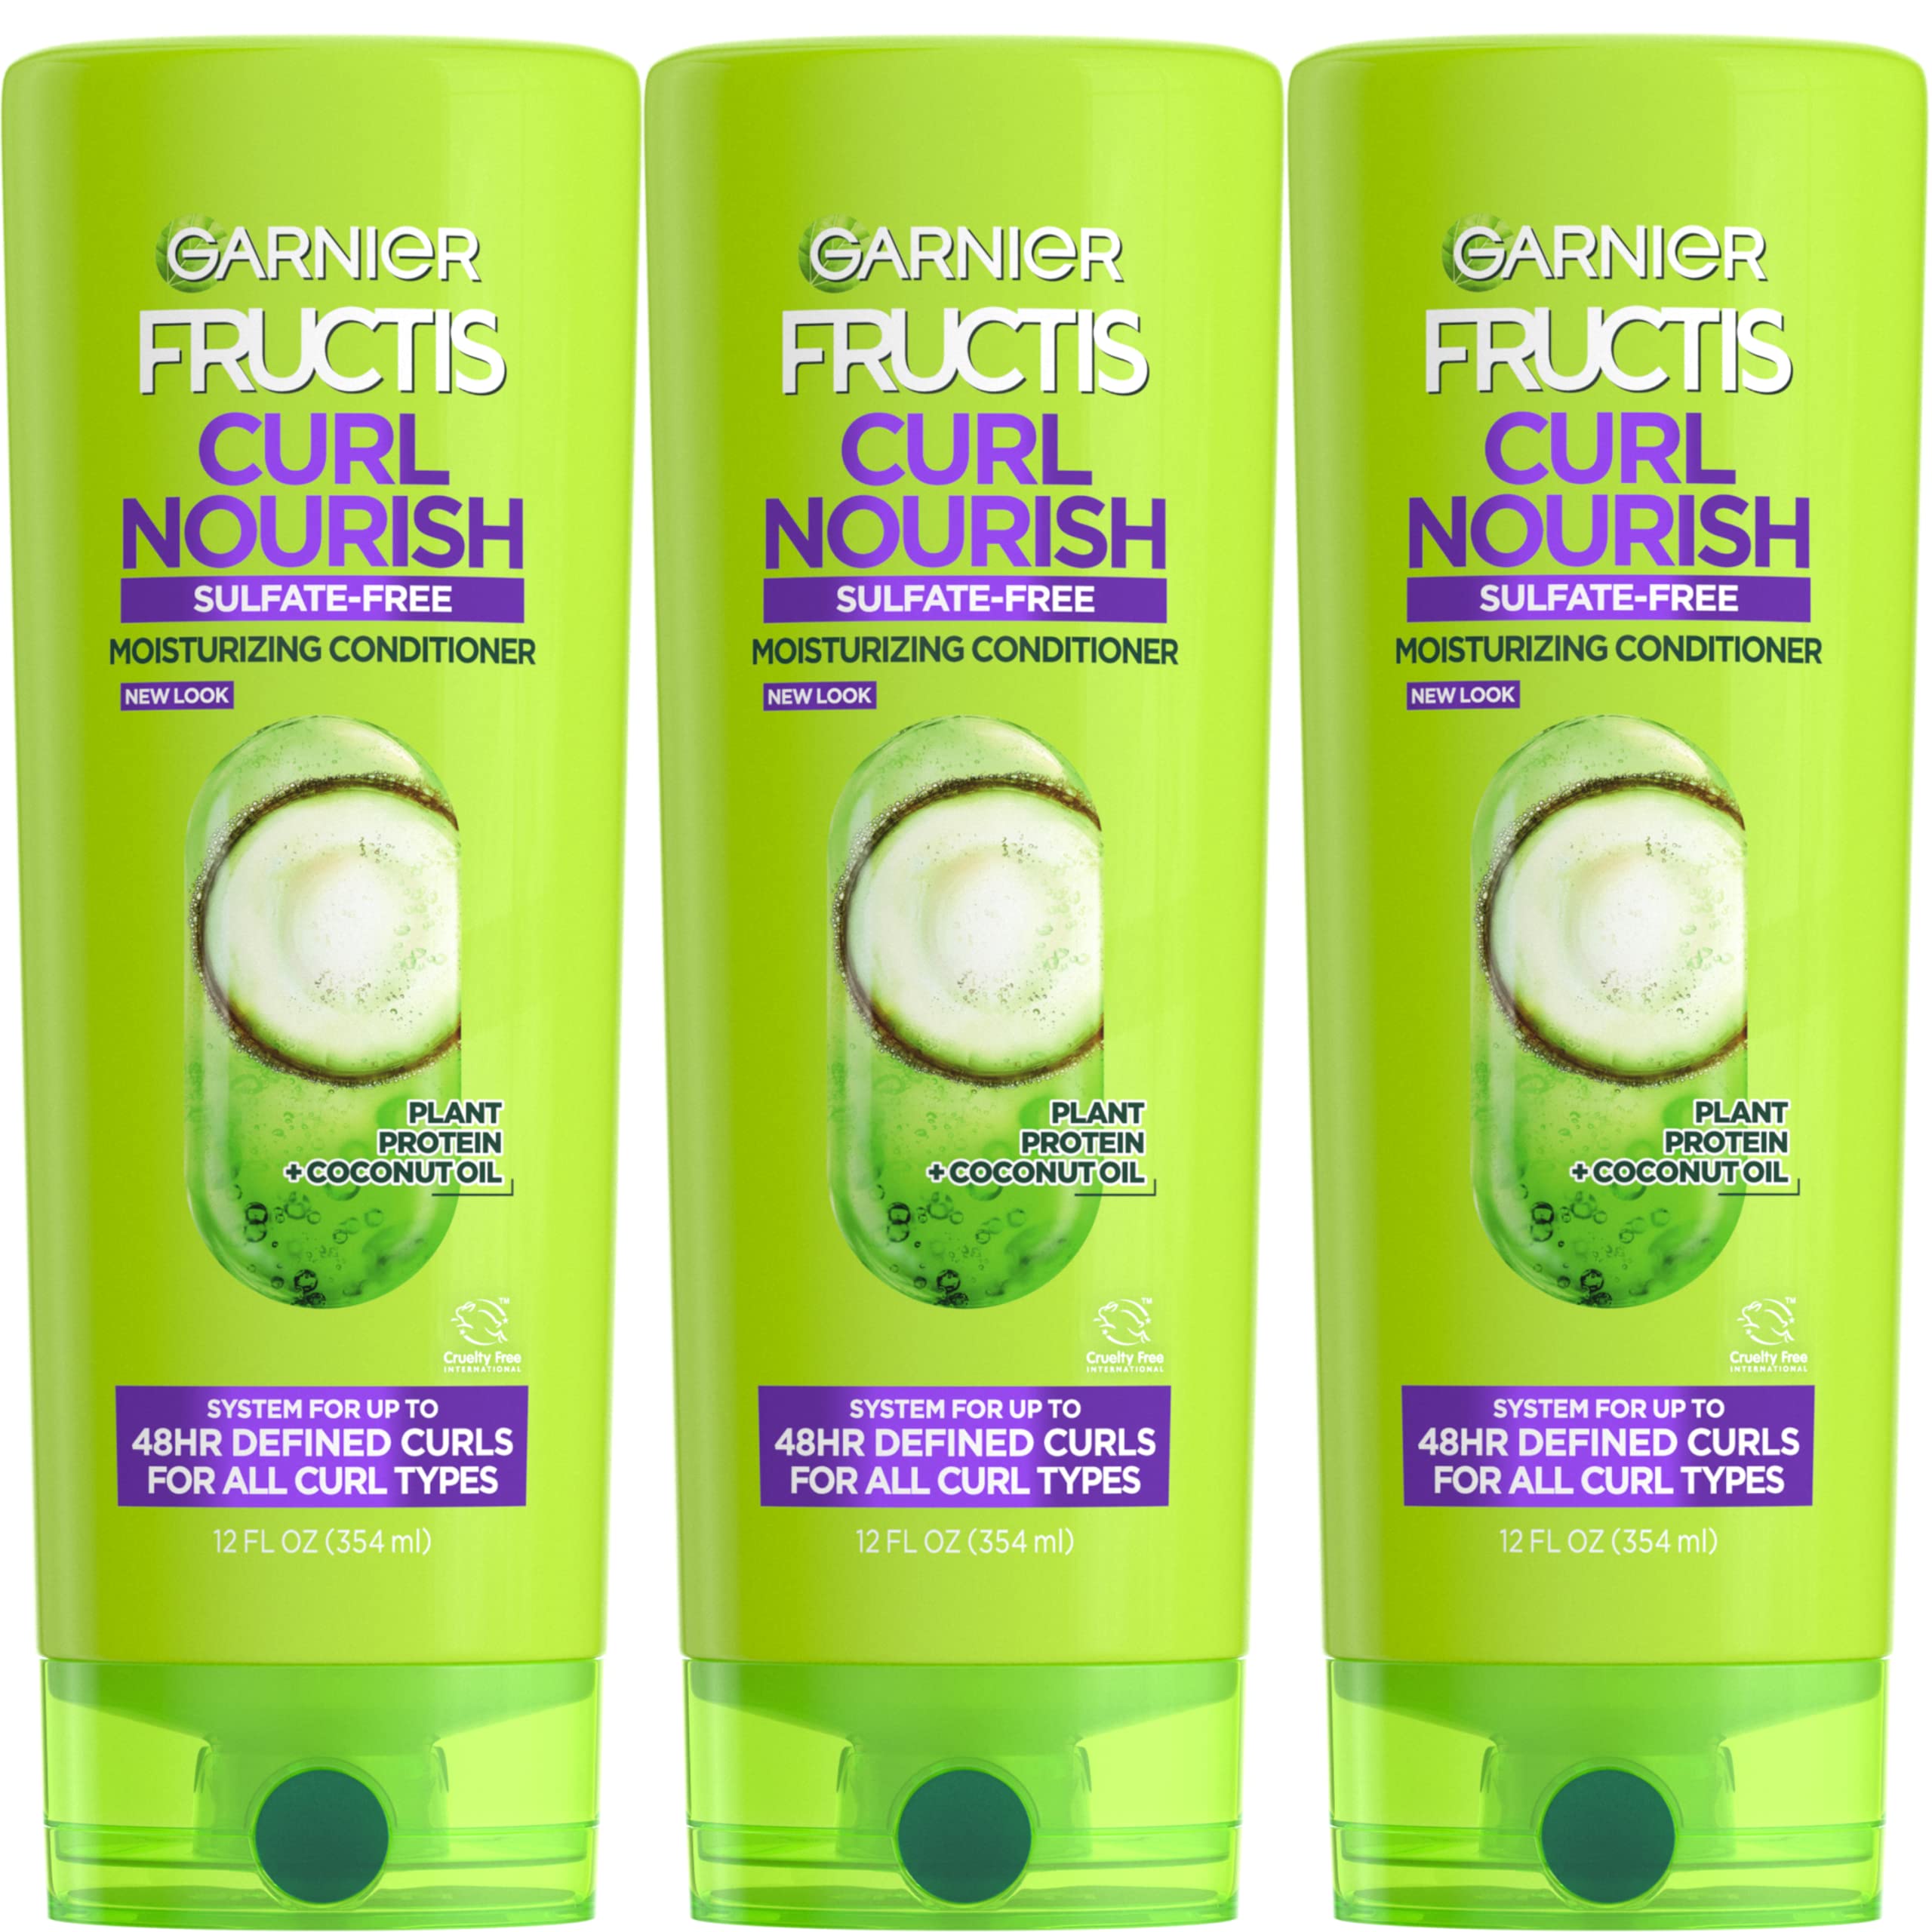 Garnier Fructis Curl Nourish Sulfate Free Moisturizing Conditioner, 12 Fl Oz, 3 Count (Packaging May Vary)